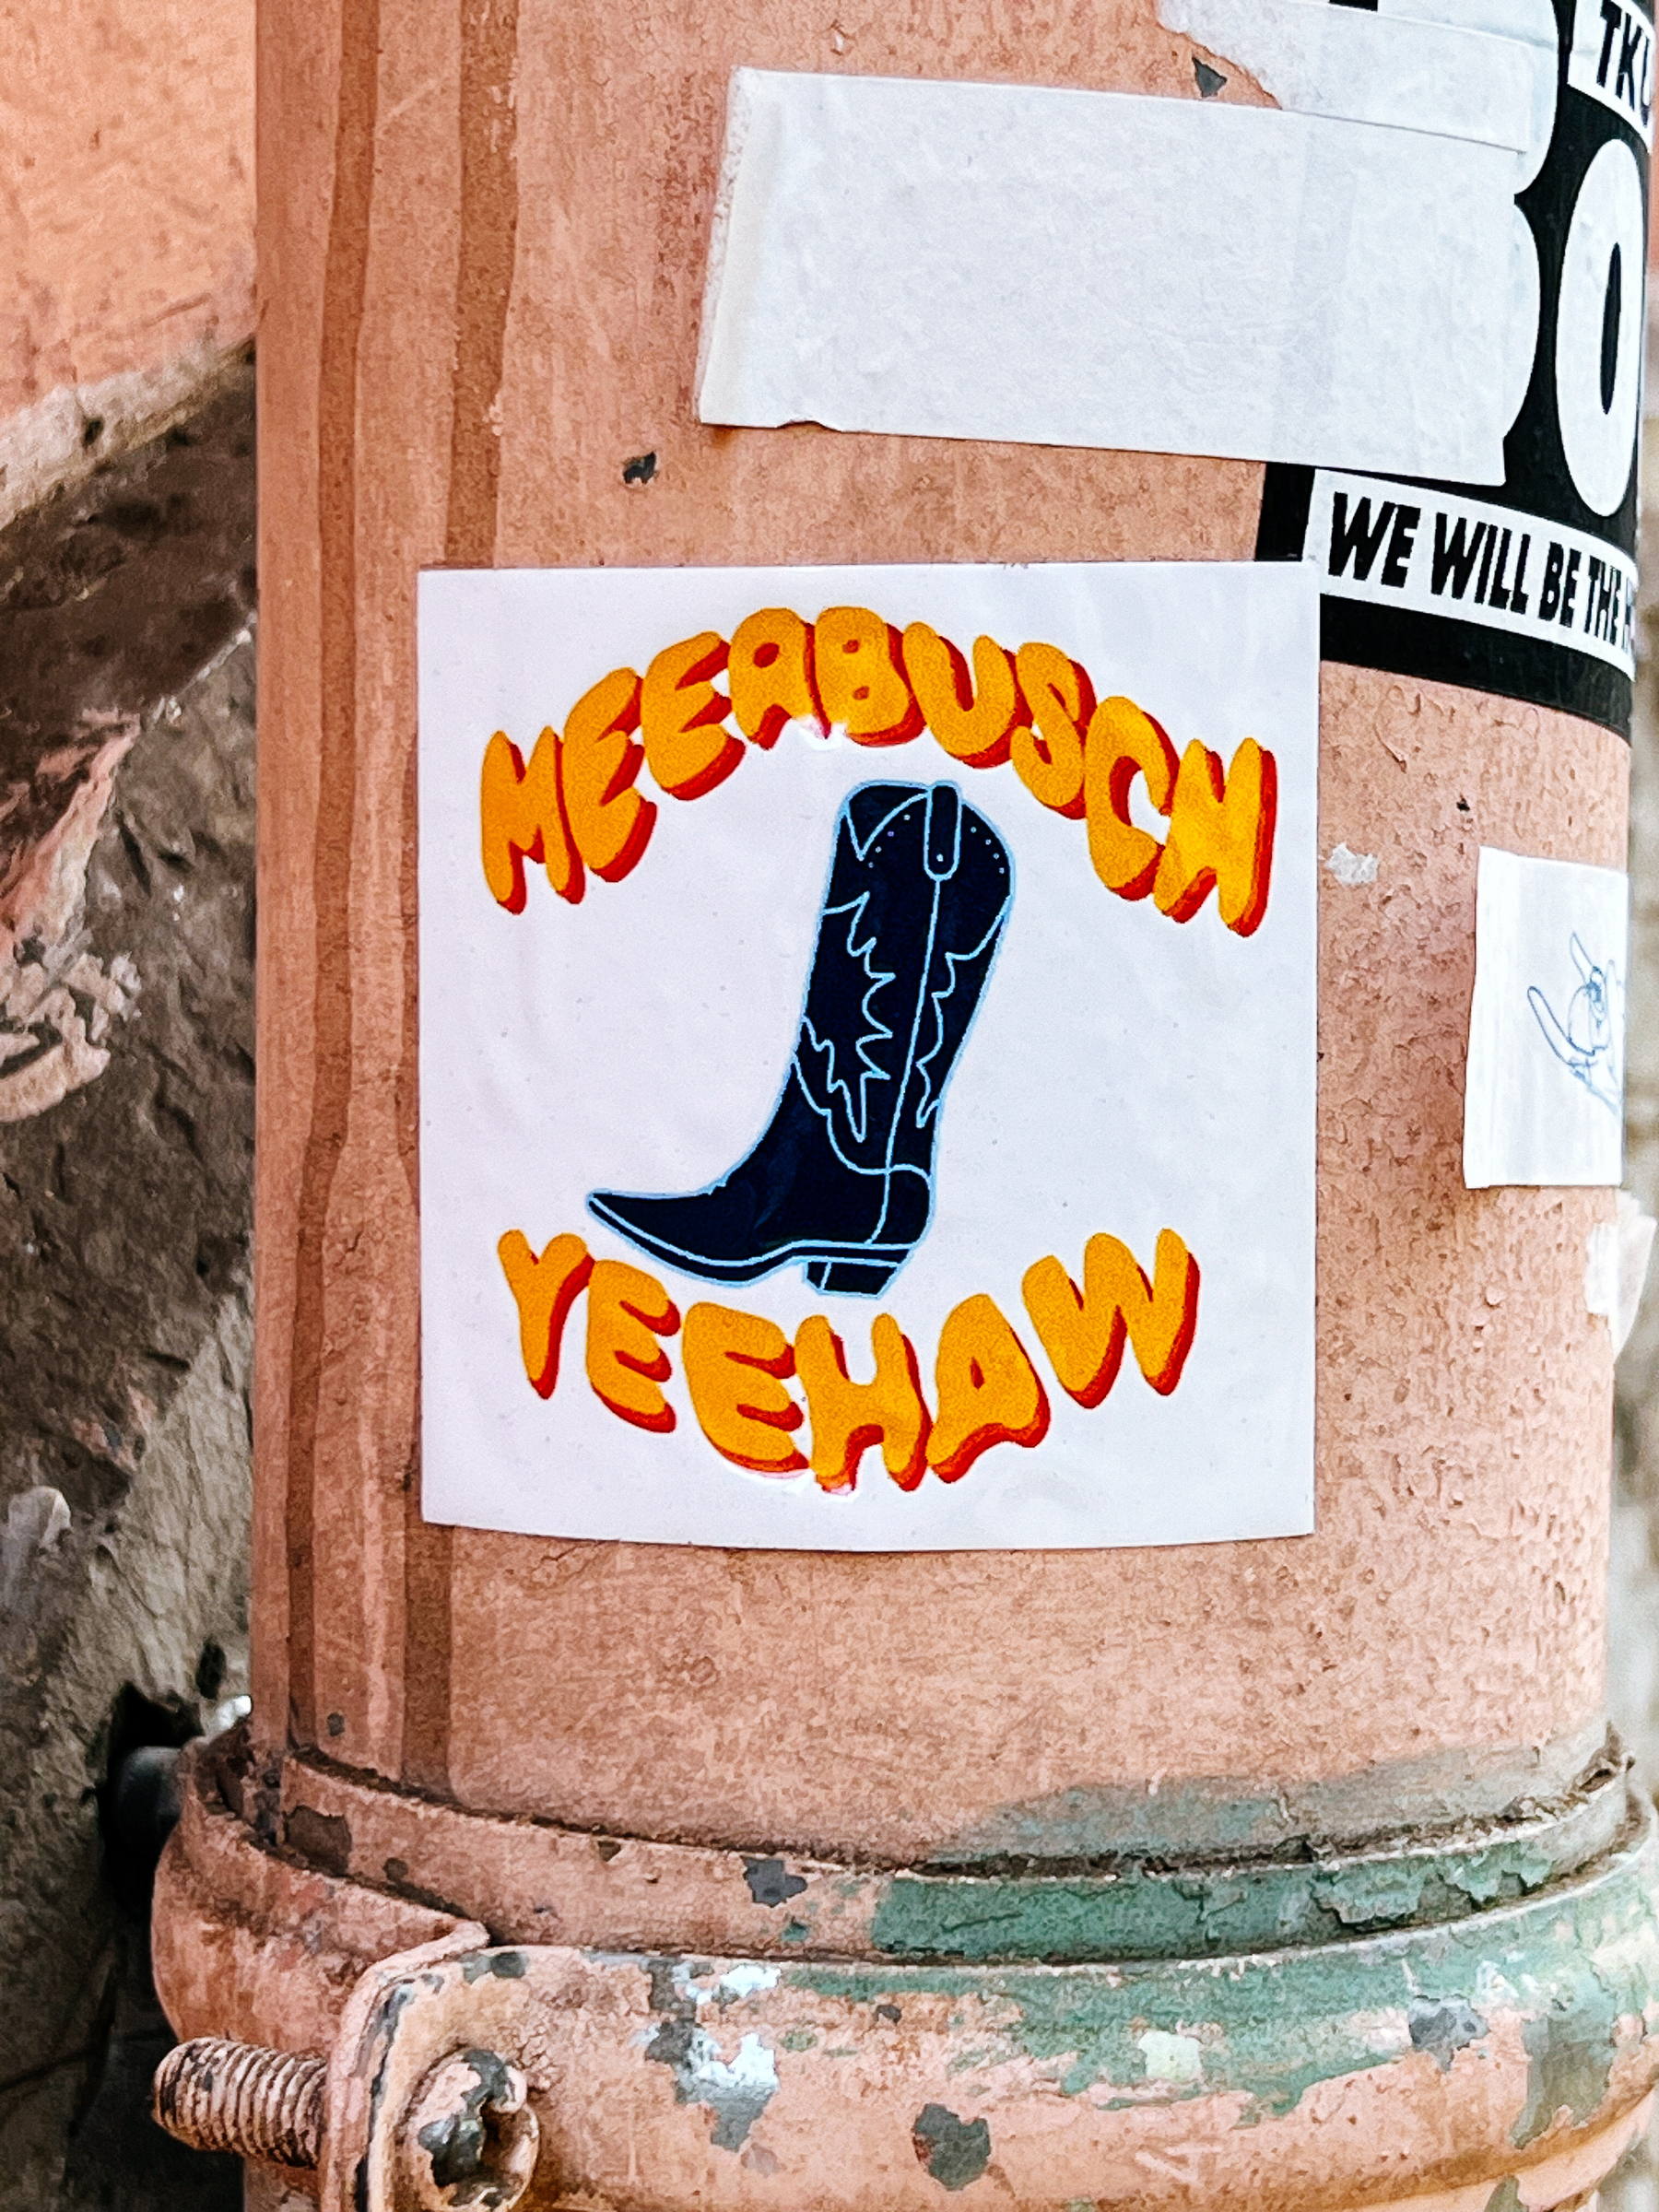 &ldquo;Meerbusch Yeehaw&rdquo;, and a cowboy boot. On a sticker. 